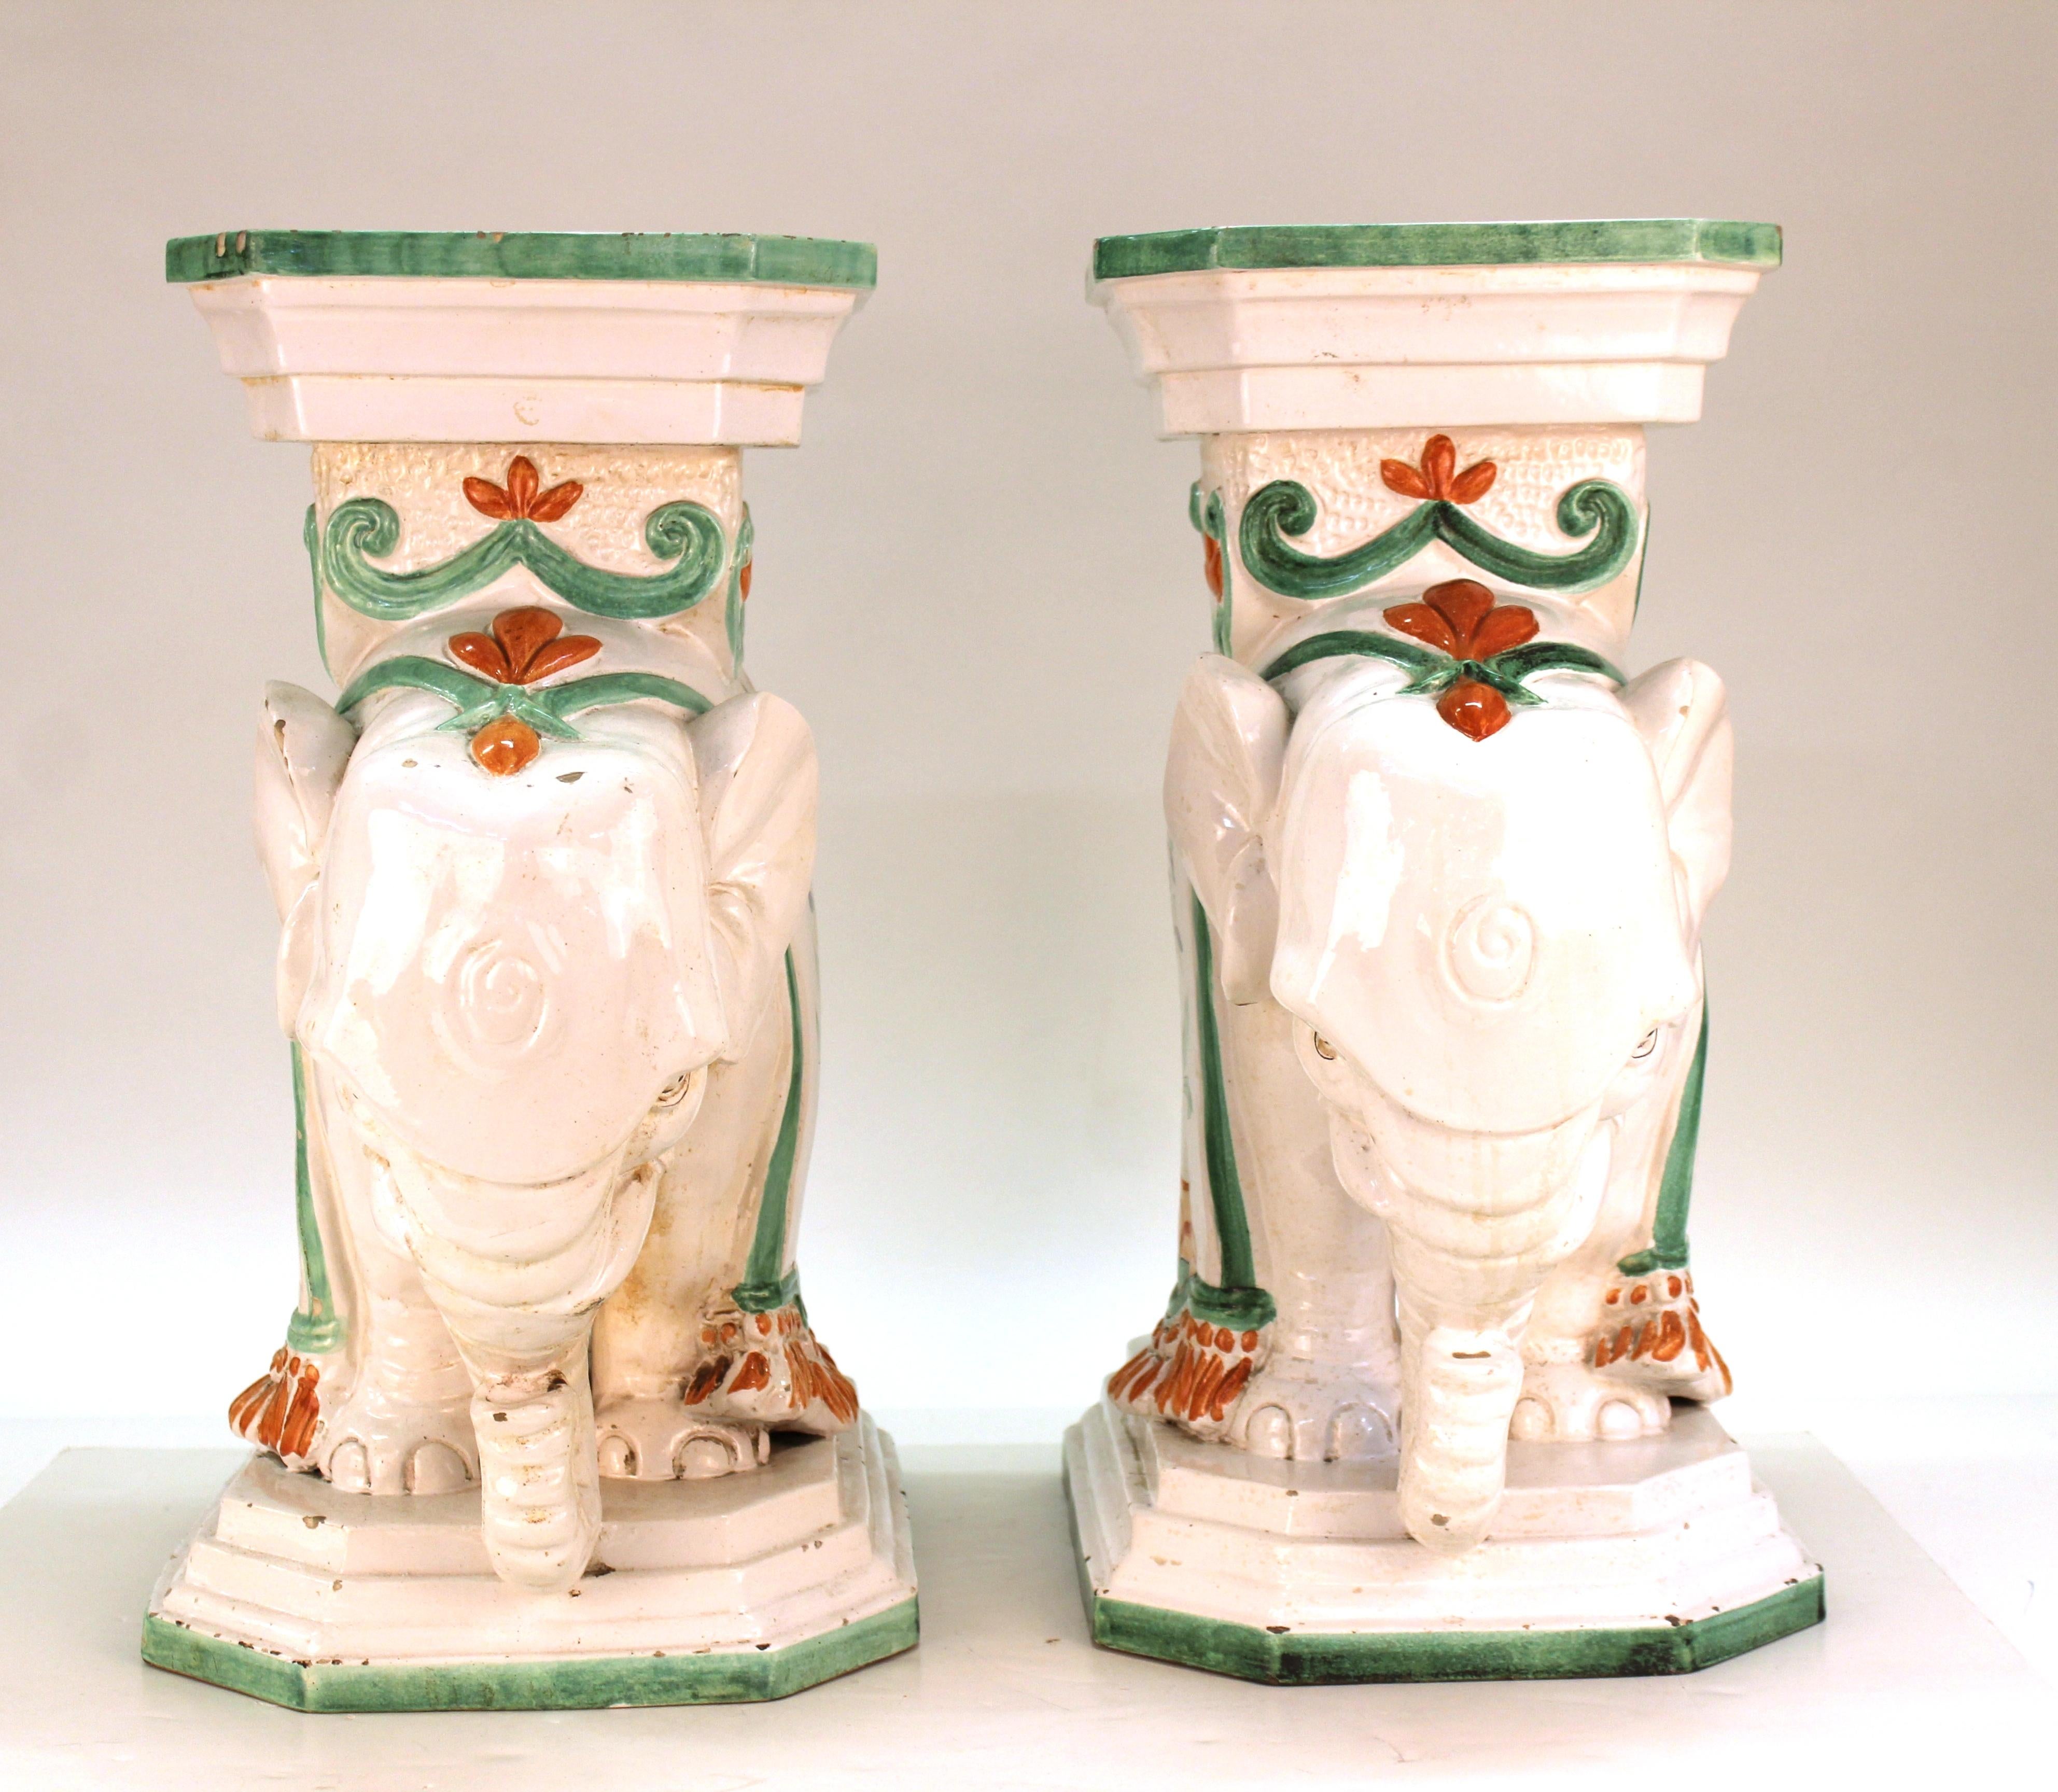 Hollywood Regency pair of hand-painted ceramic garden stools or pedestals in the shape of elephants. The pair is marked on the bottom and was made in Italy. Some minor chips to the surface, but overall in good vintage condition.